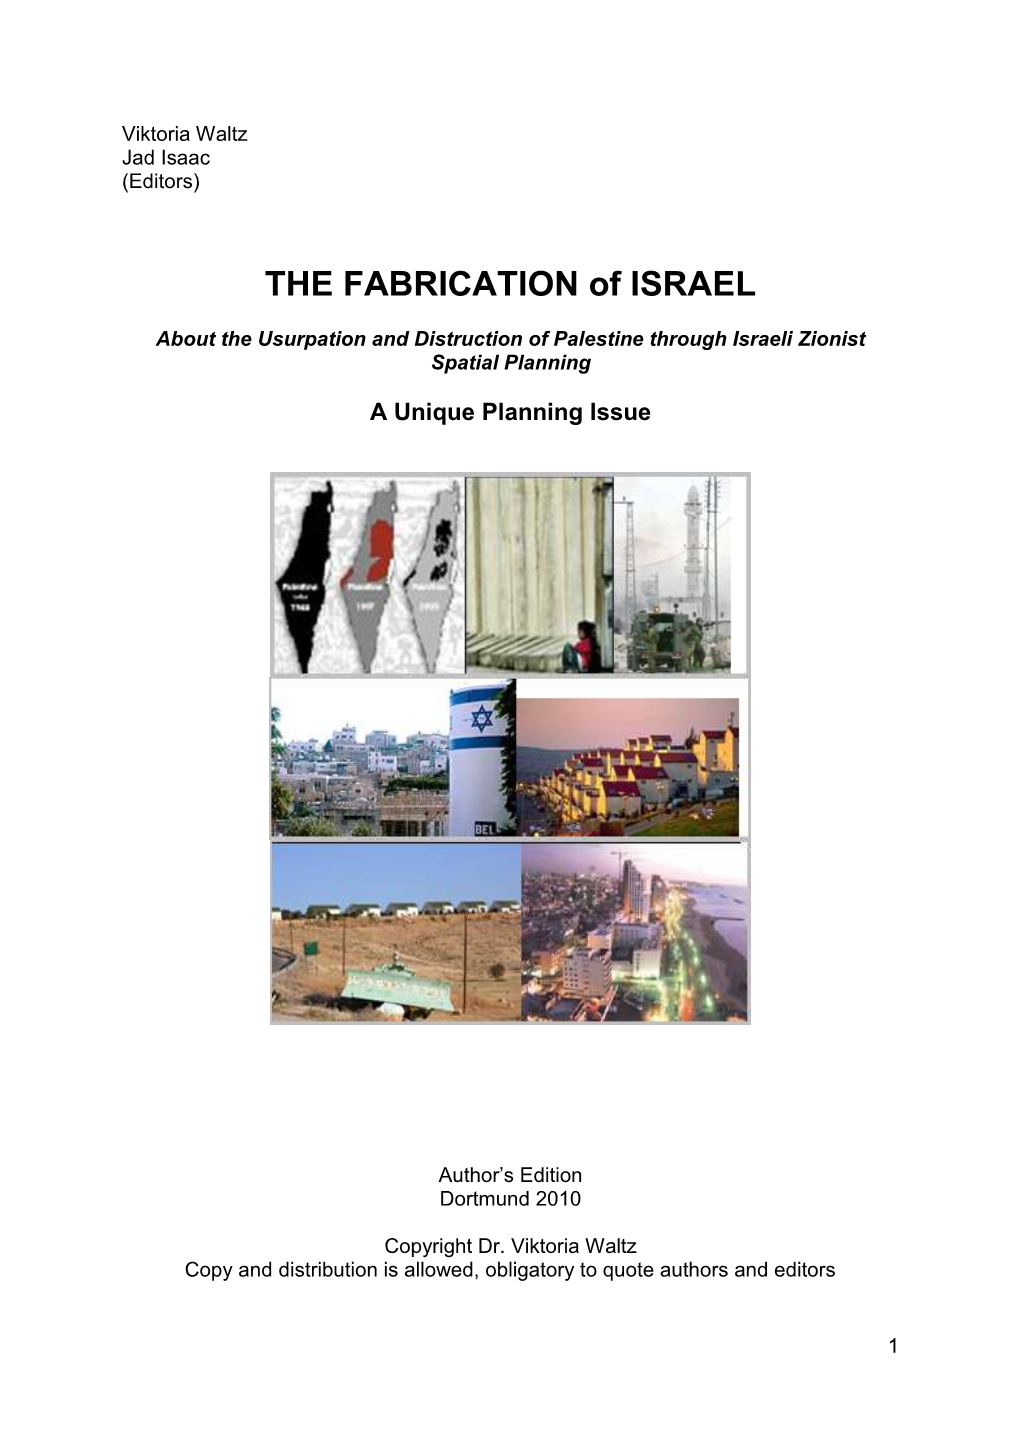 THE FABRICATION of ISRAEL